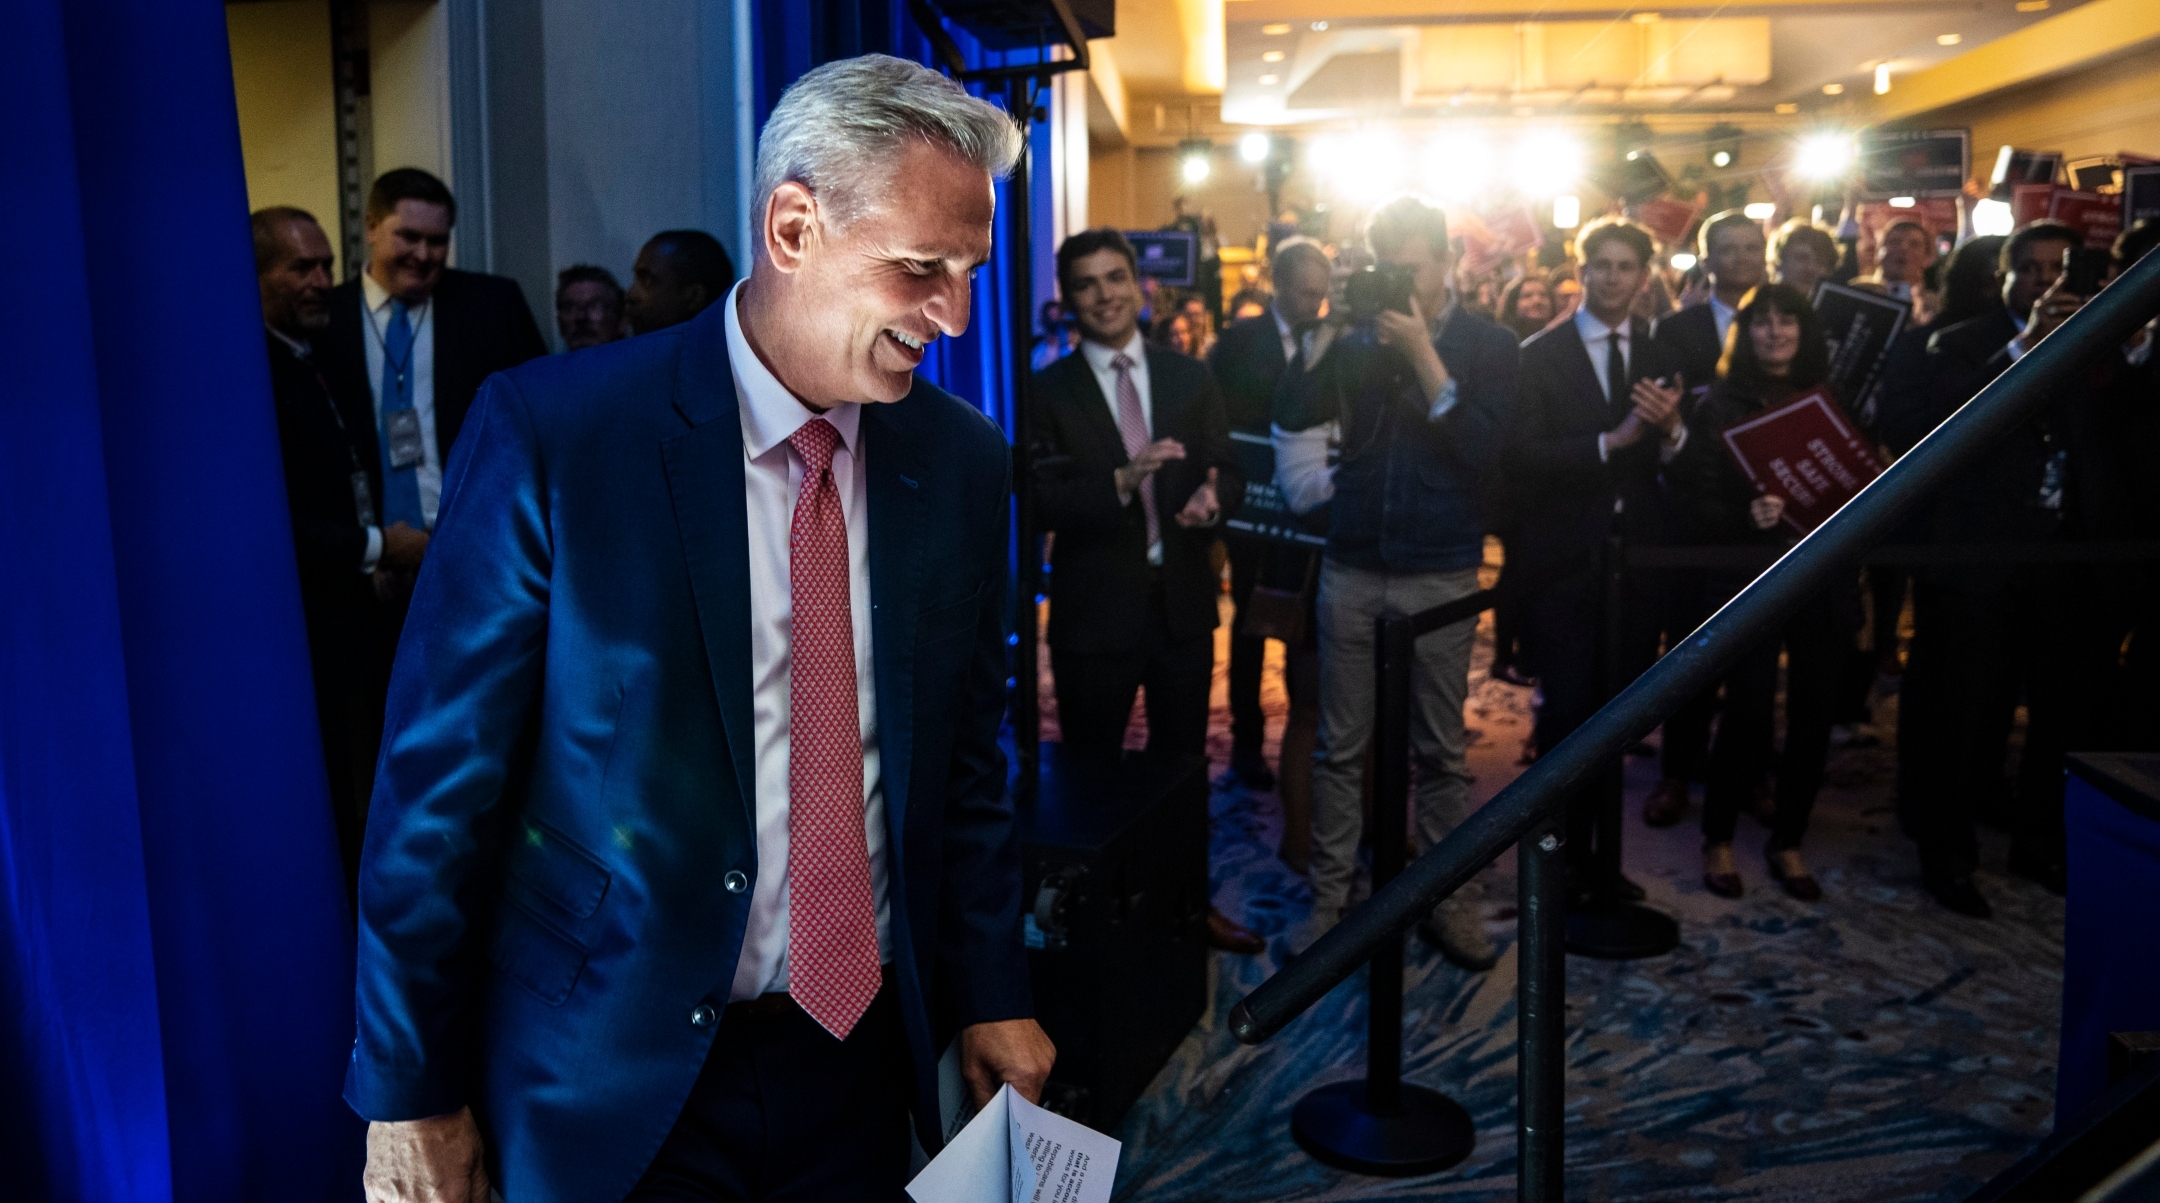 Kevin McCarthy of California walks out to give a speech on the results of the midterm election at the Westin Hotel in Washington, D.C, Nov. 9, 2022. (Jabin Botsford/The Washington Post via Getty Images)